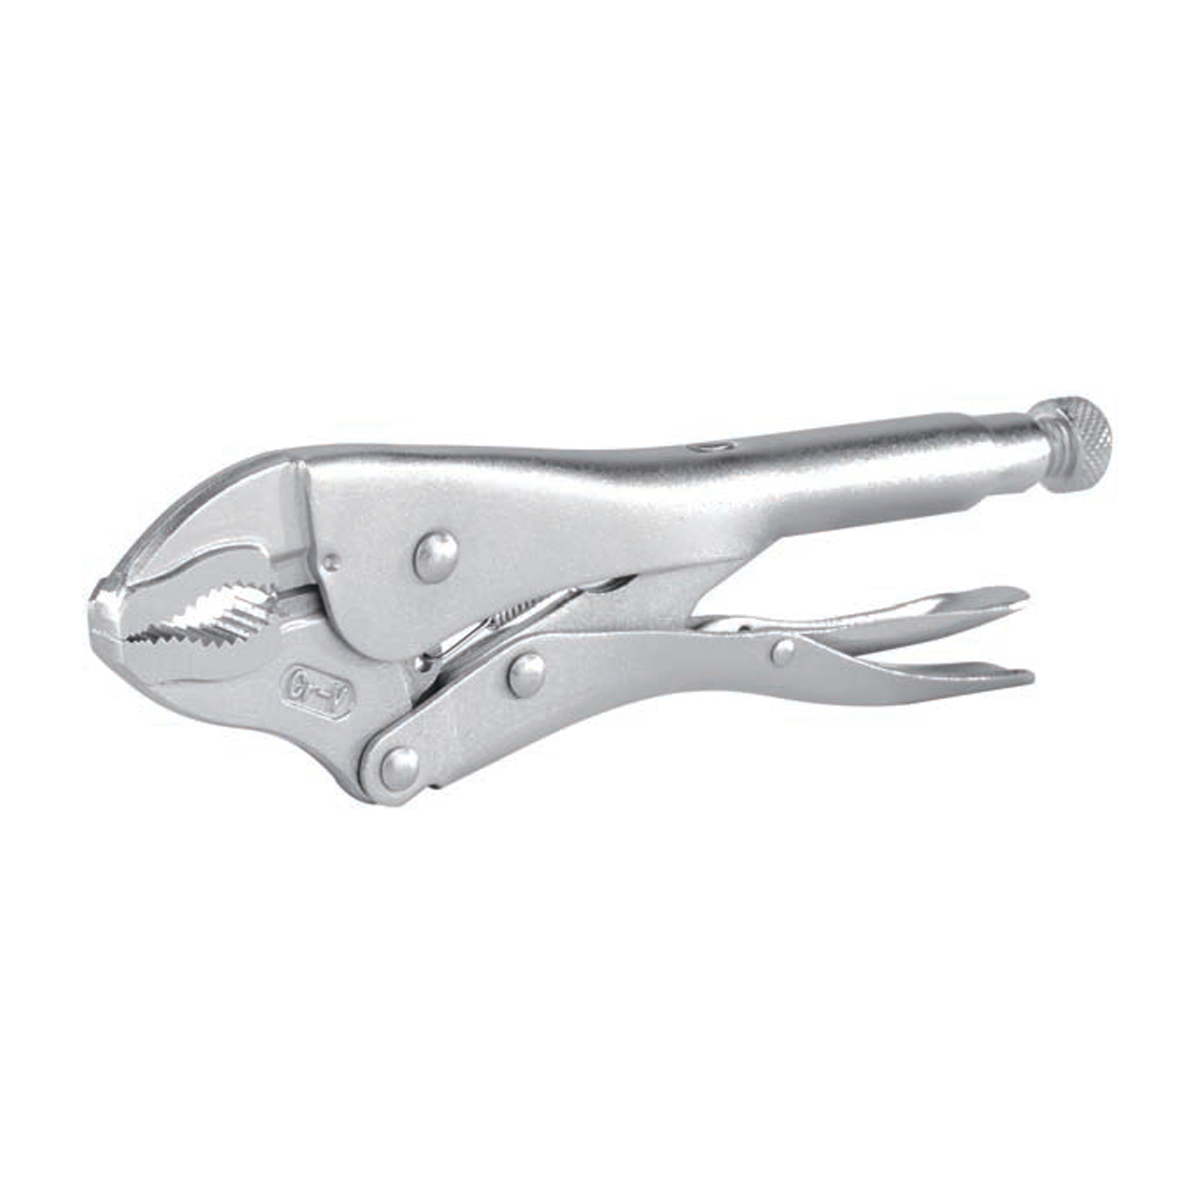 CURVED JAW LOCKING PLIERS